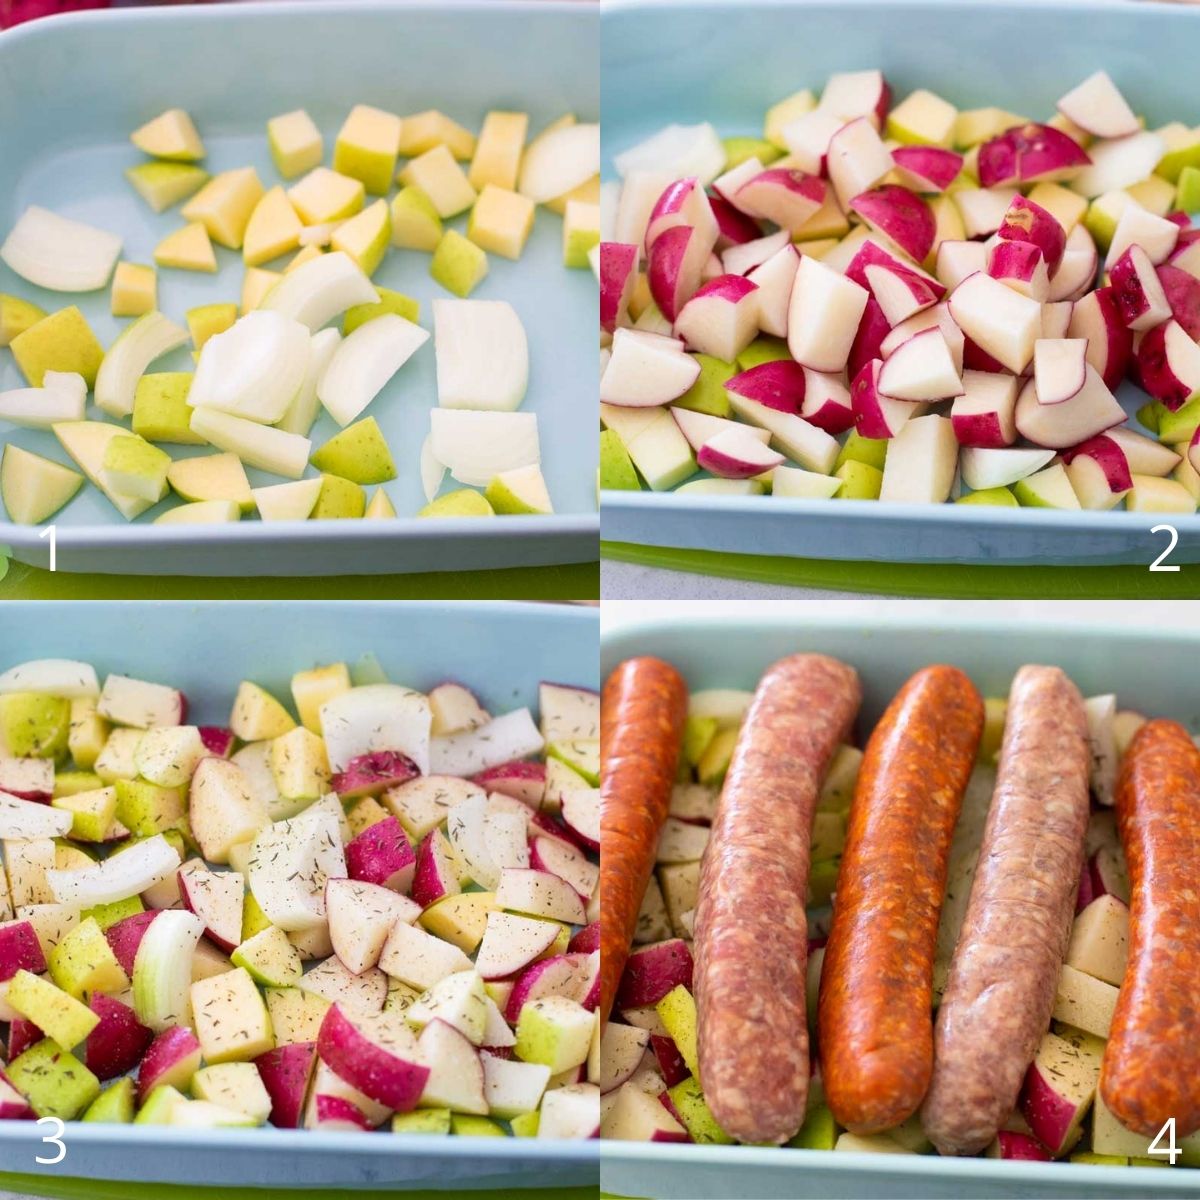 Step by step photos show how to layer the apples, potatoes, and sausages in a baking dish.